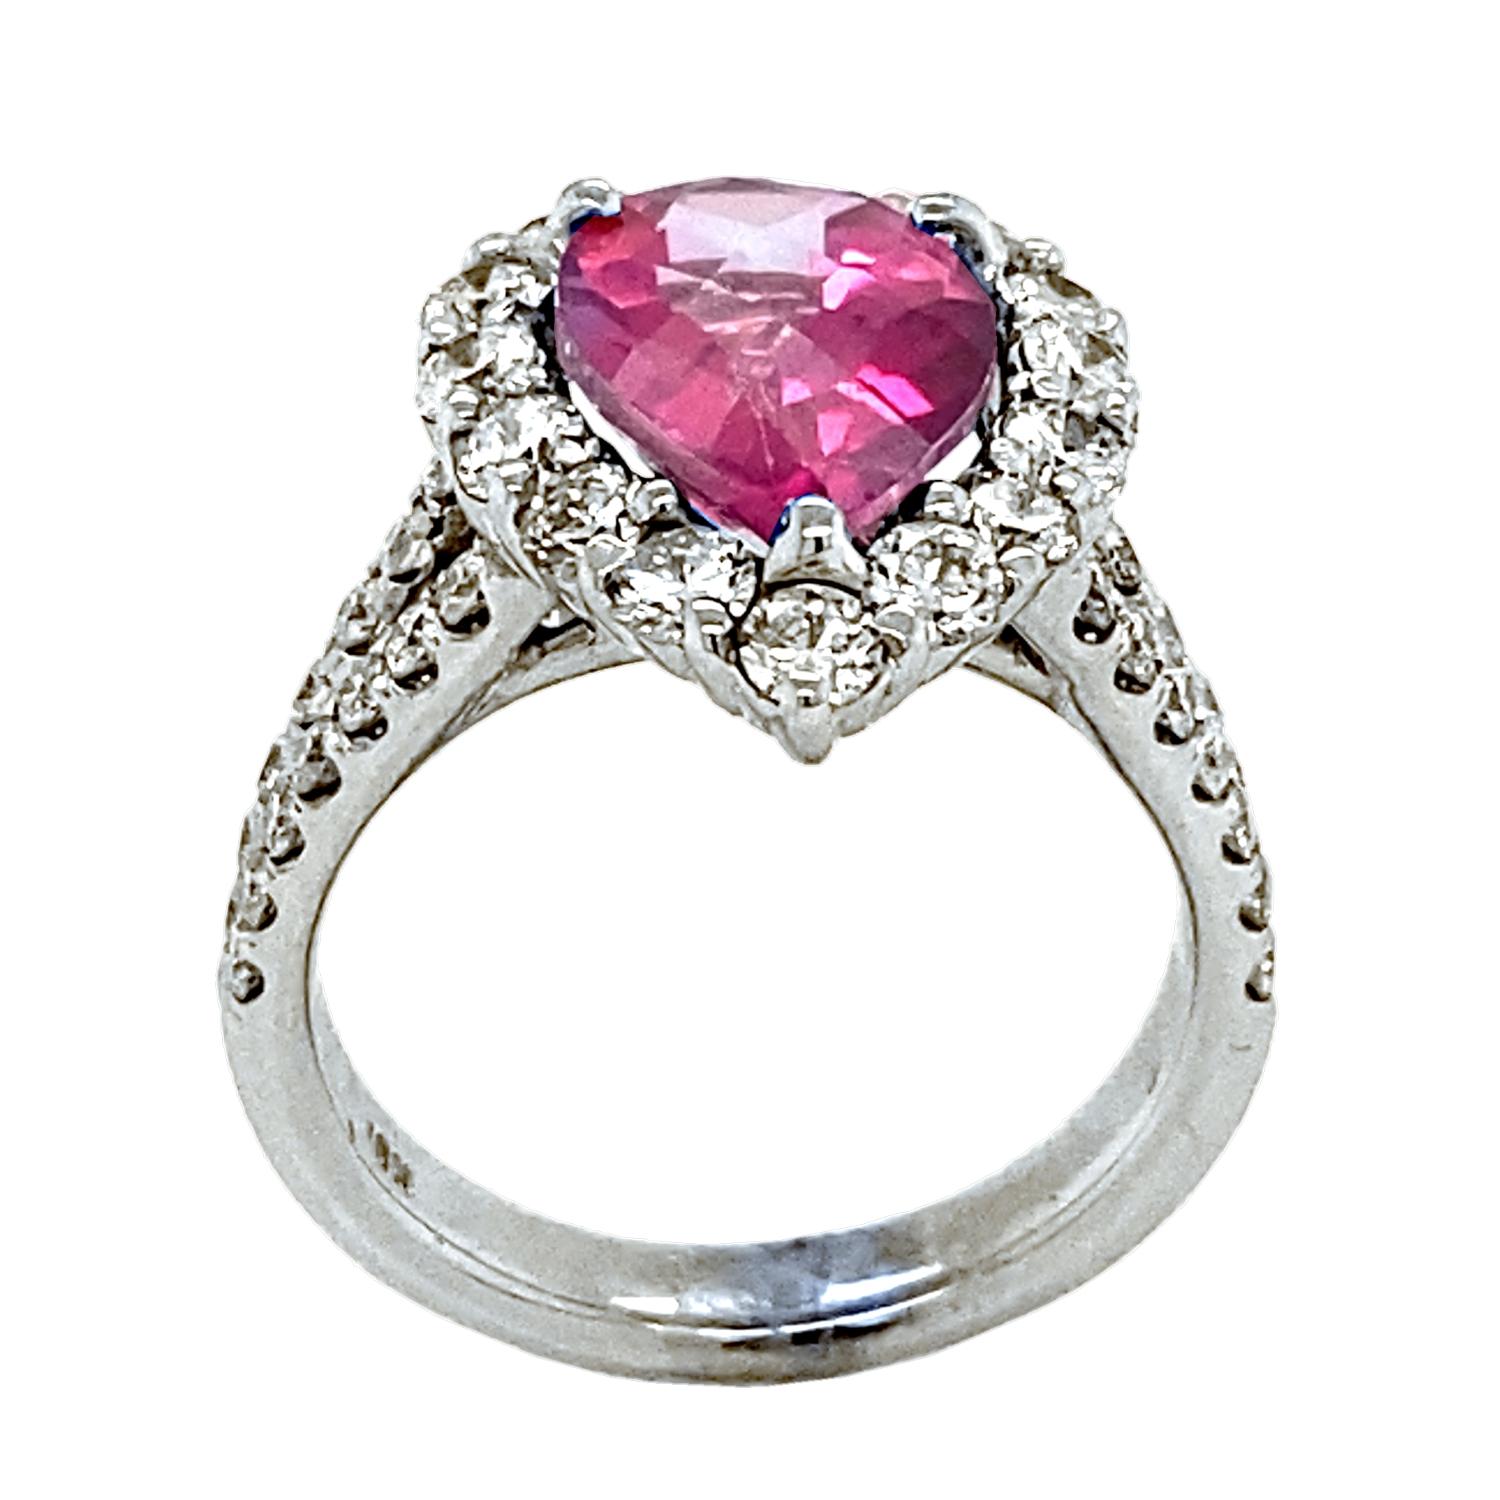 A beautiful color 3.60 Ct Pear Shaped Pink Topaz center with proper proportions set in gorgeous 18k gold Pave set Engagement Ring with Halo with total diamond weight of 1.40 Ct. on the side. 

Center stone: 3.60 Ct Pear shape Pink Topaz
Side stones: